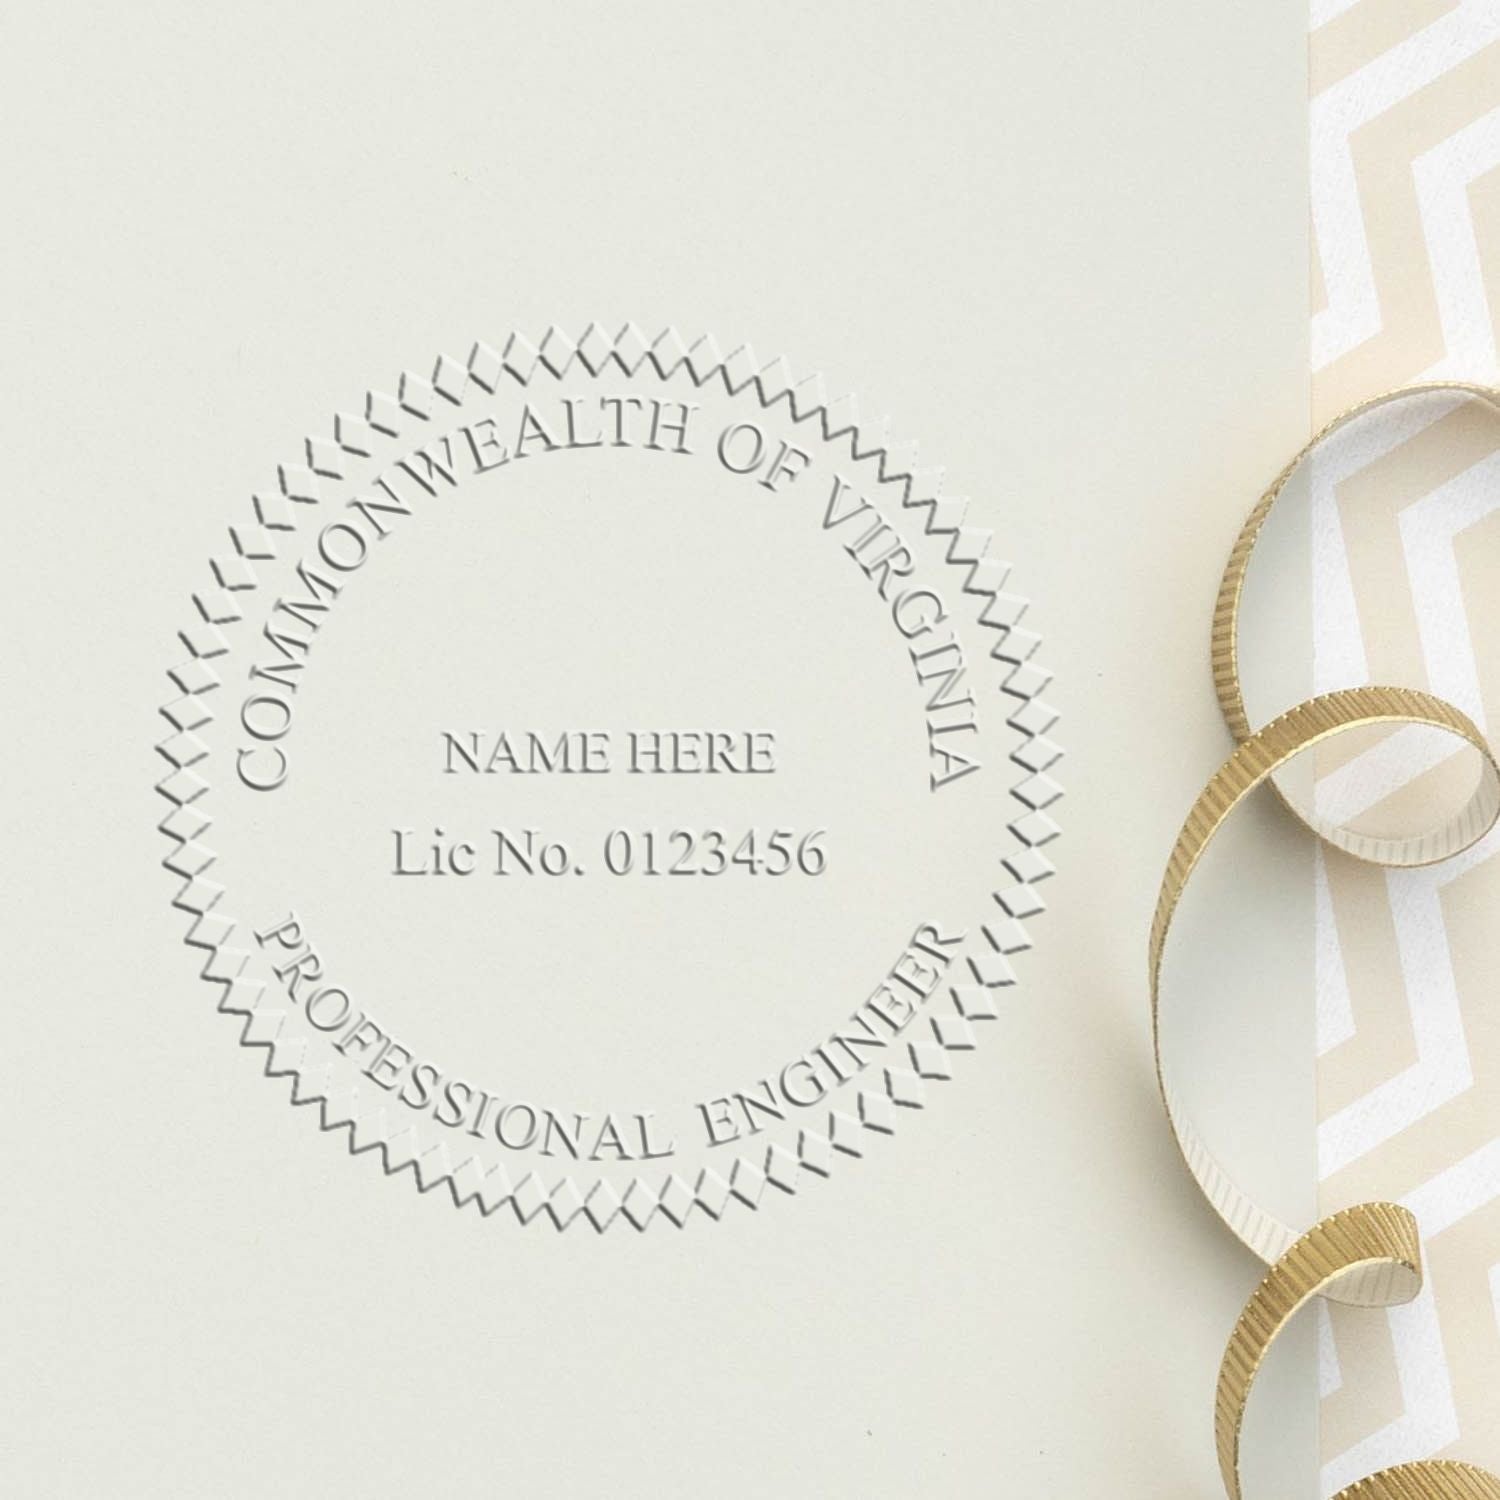 A stamped impression of the Soft Virginia Professional Engineer Seal in this stylish lifestyle photo, setting the tone for a unique and personalized product.